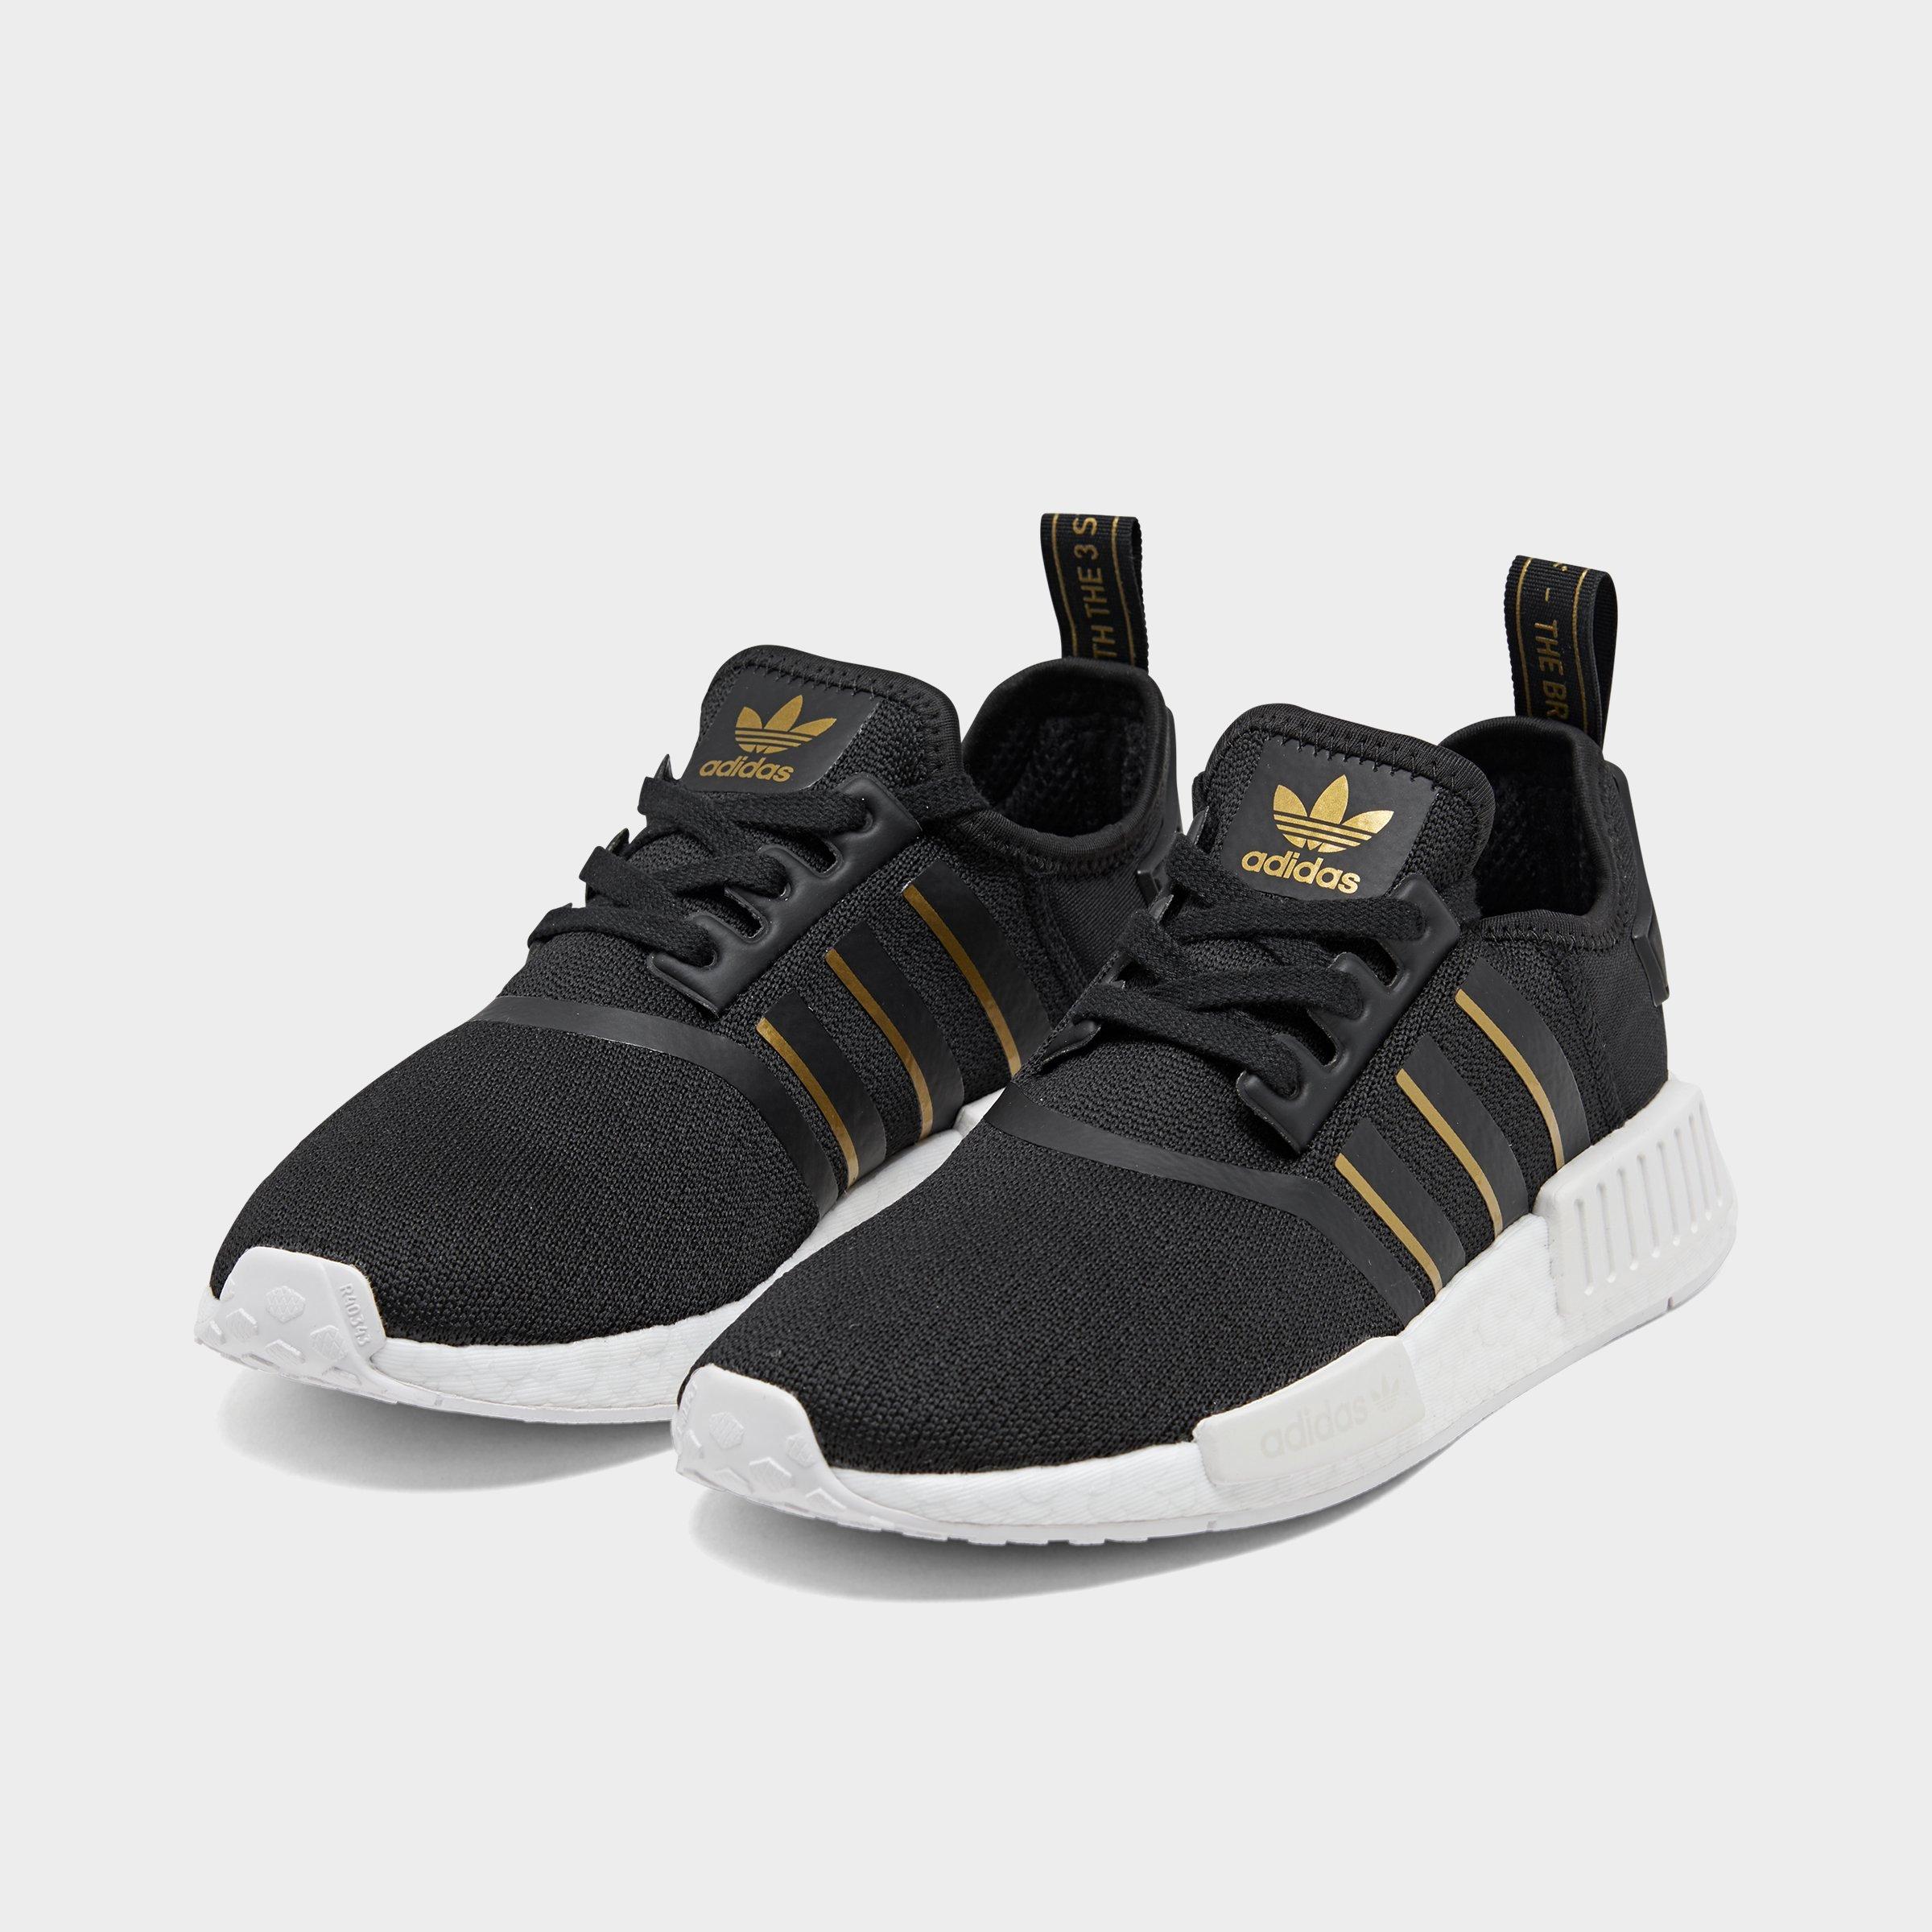 adidas black with gold stripes